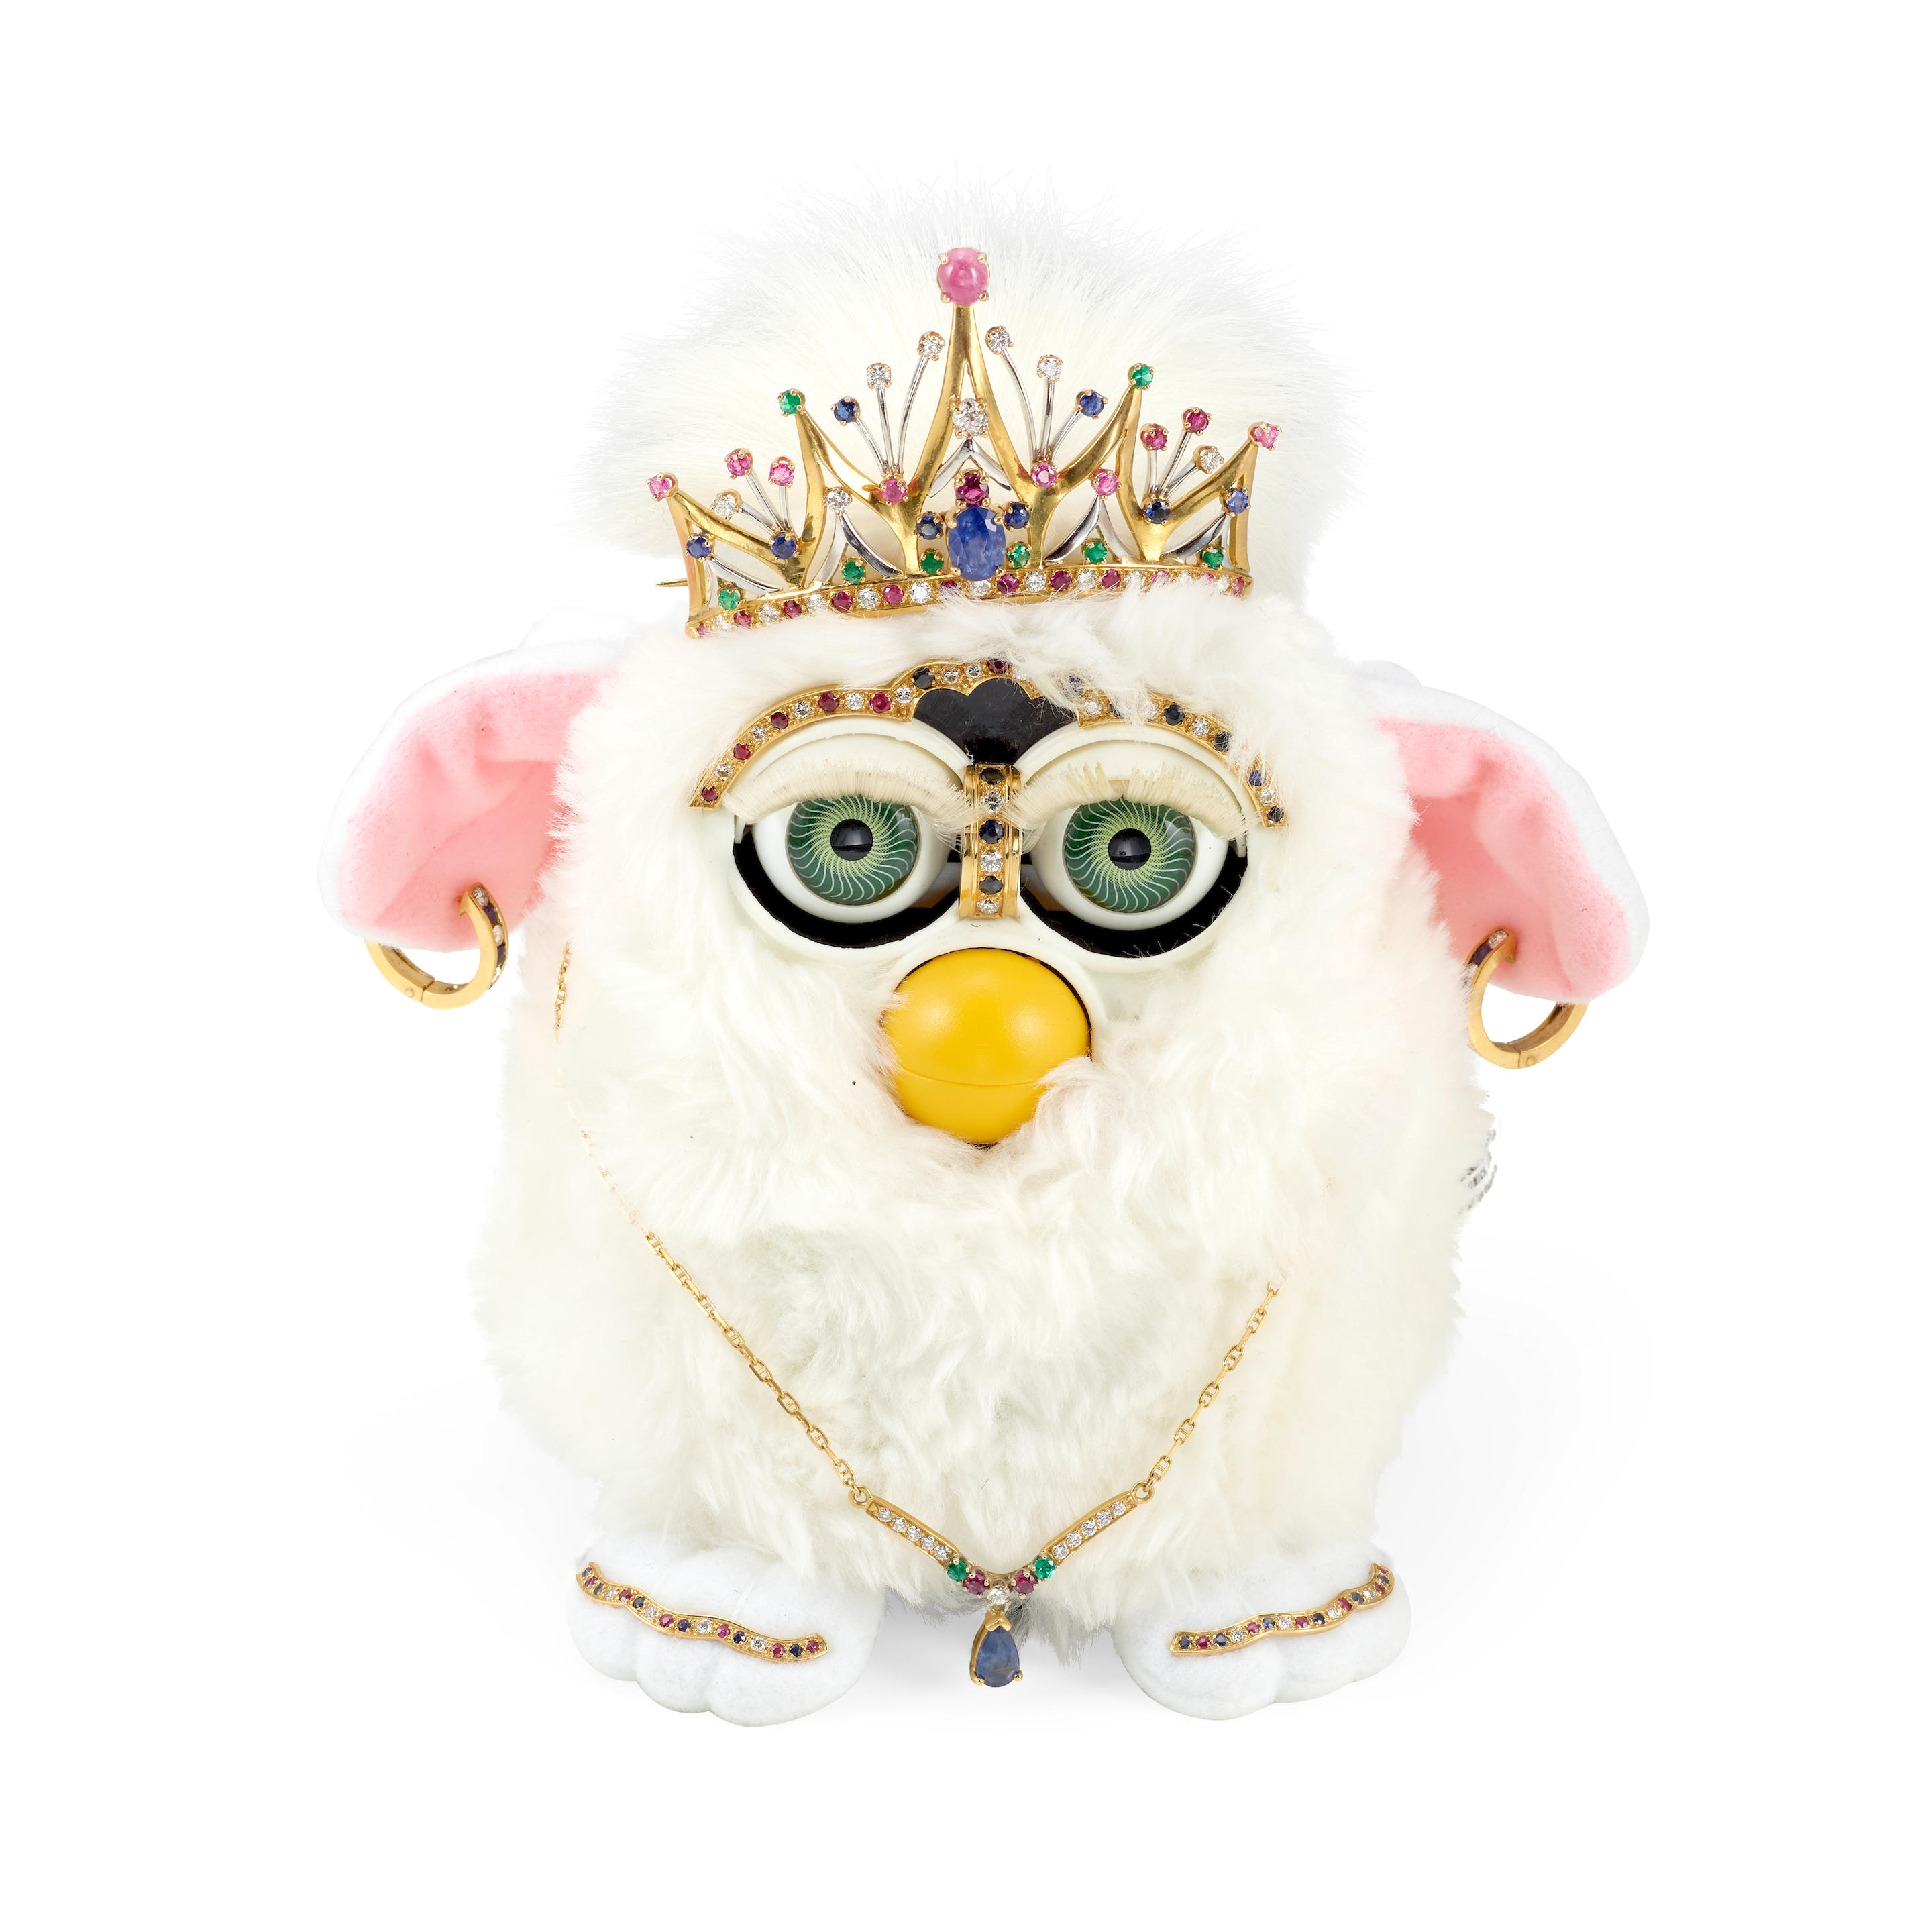 Uncut Gems Bedazzled Furby: A History